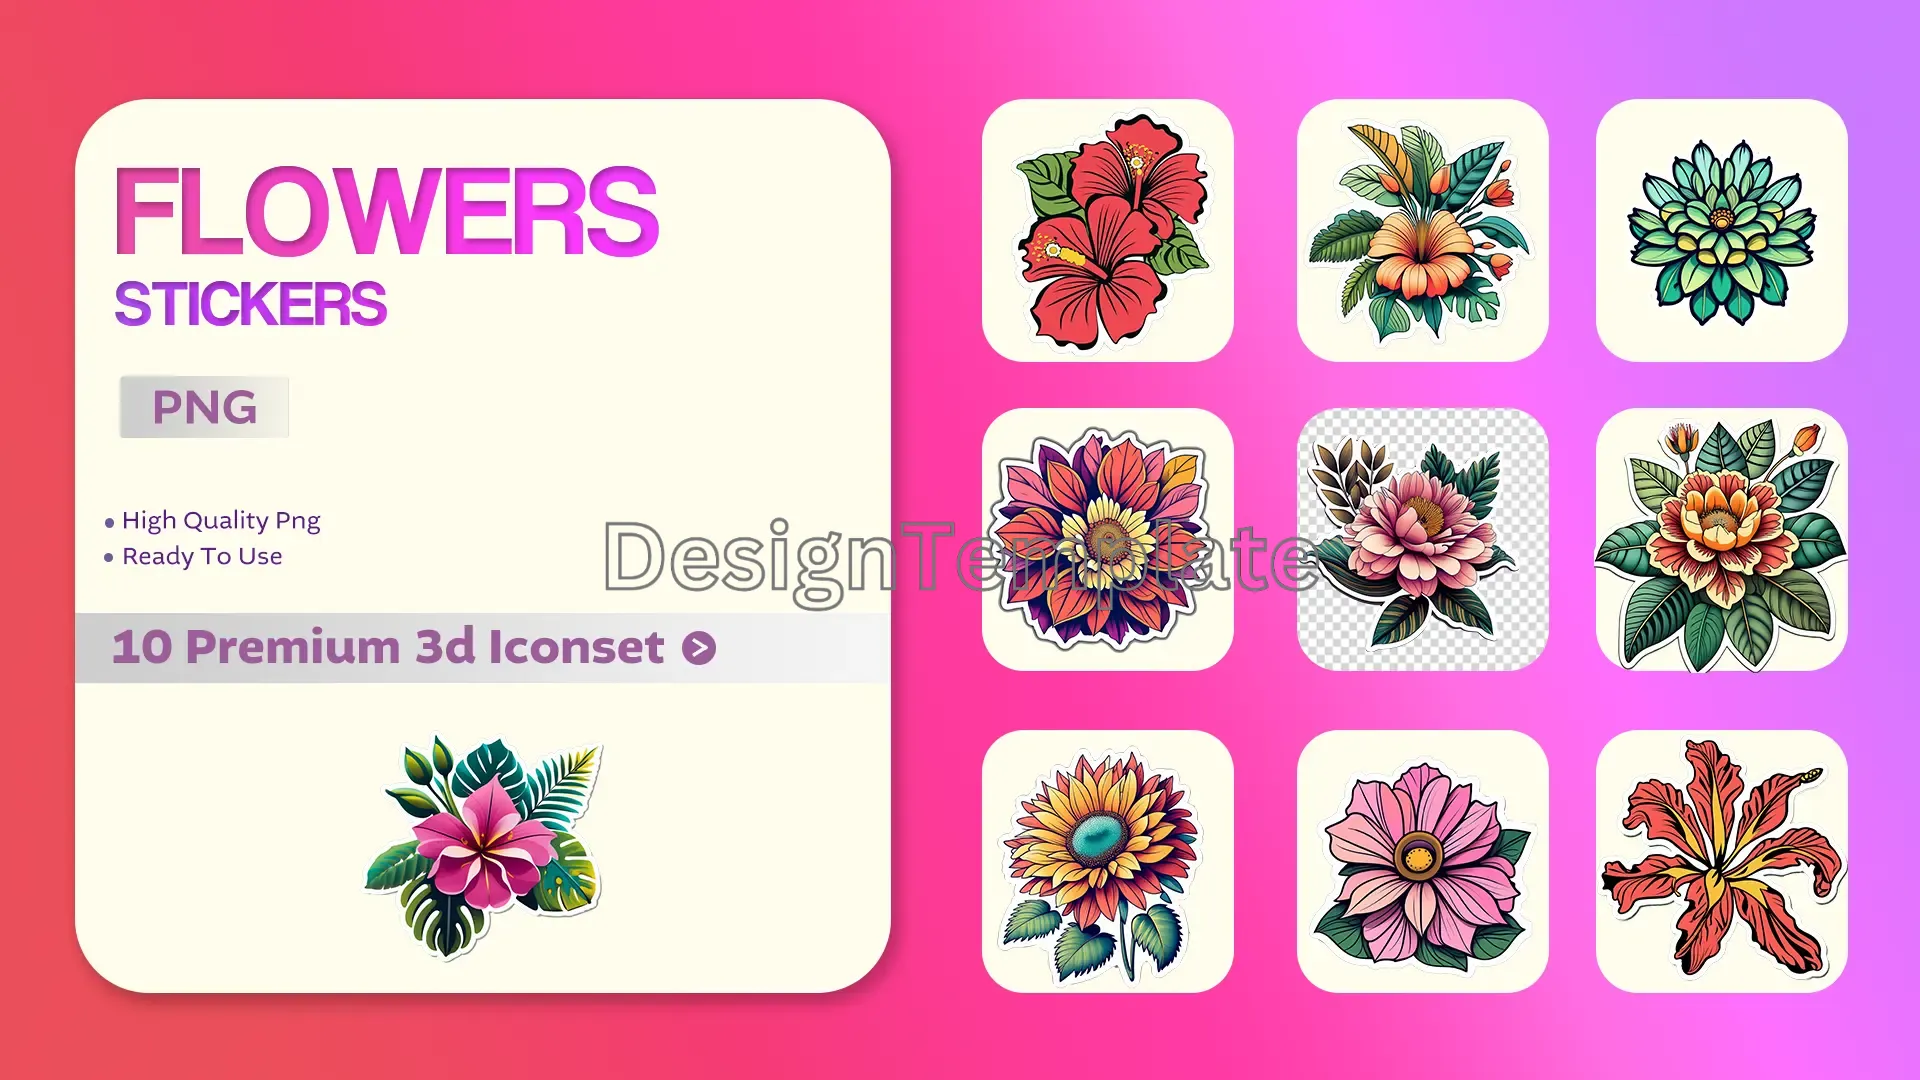 Floral Fantasy Exquisite 3D Flowers Stickers Collection image